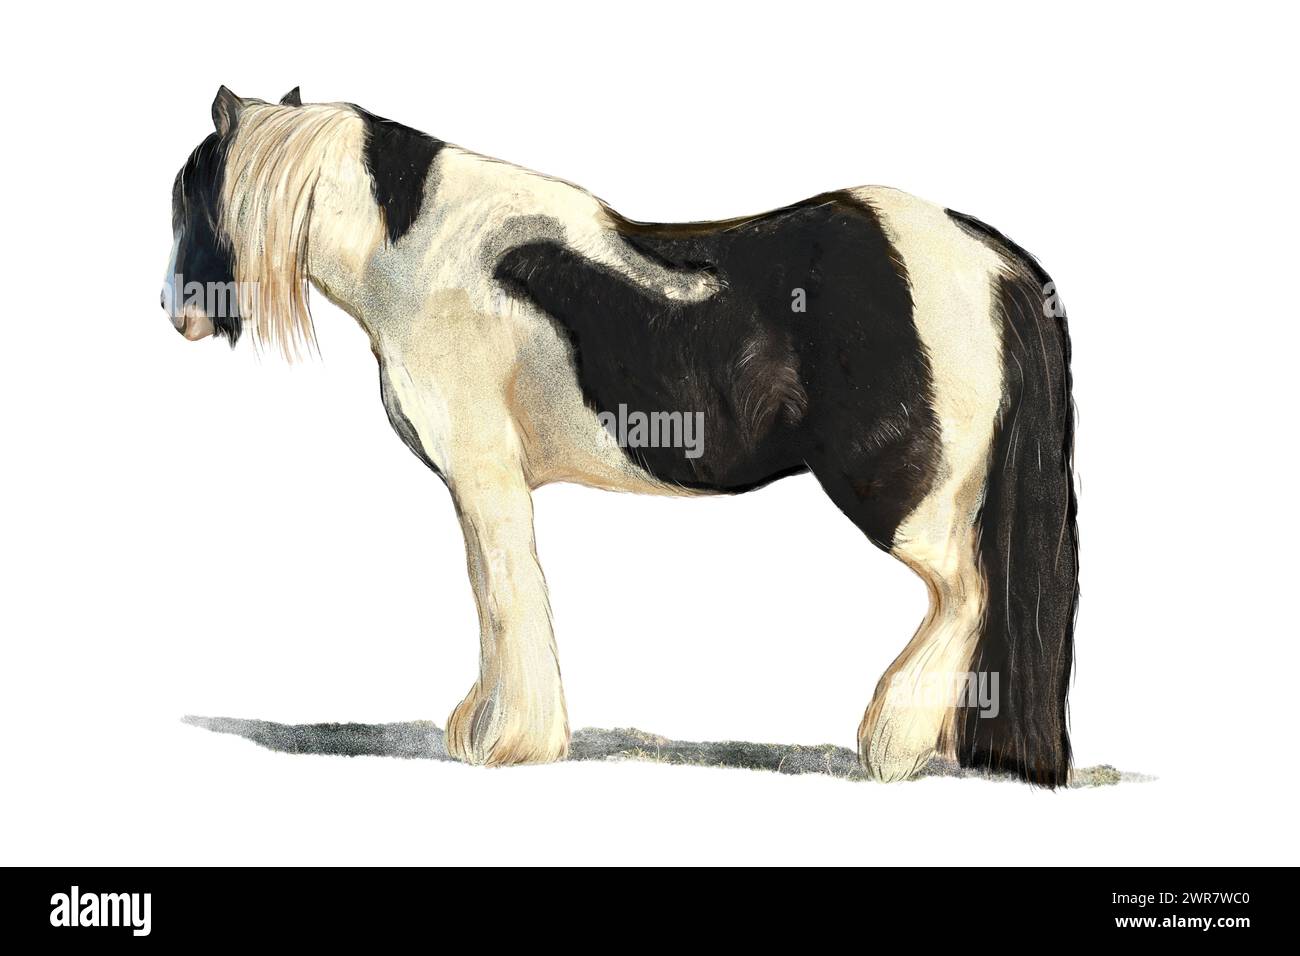 Black and white piebald horse painted in watercolor style Stock Photo